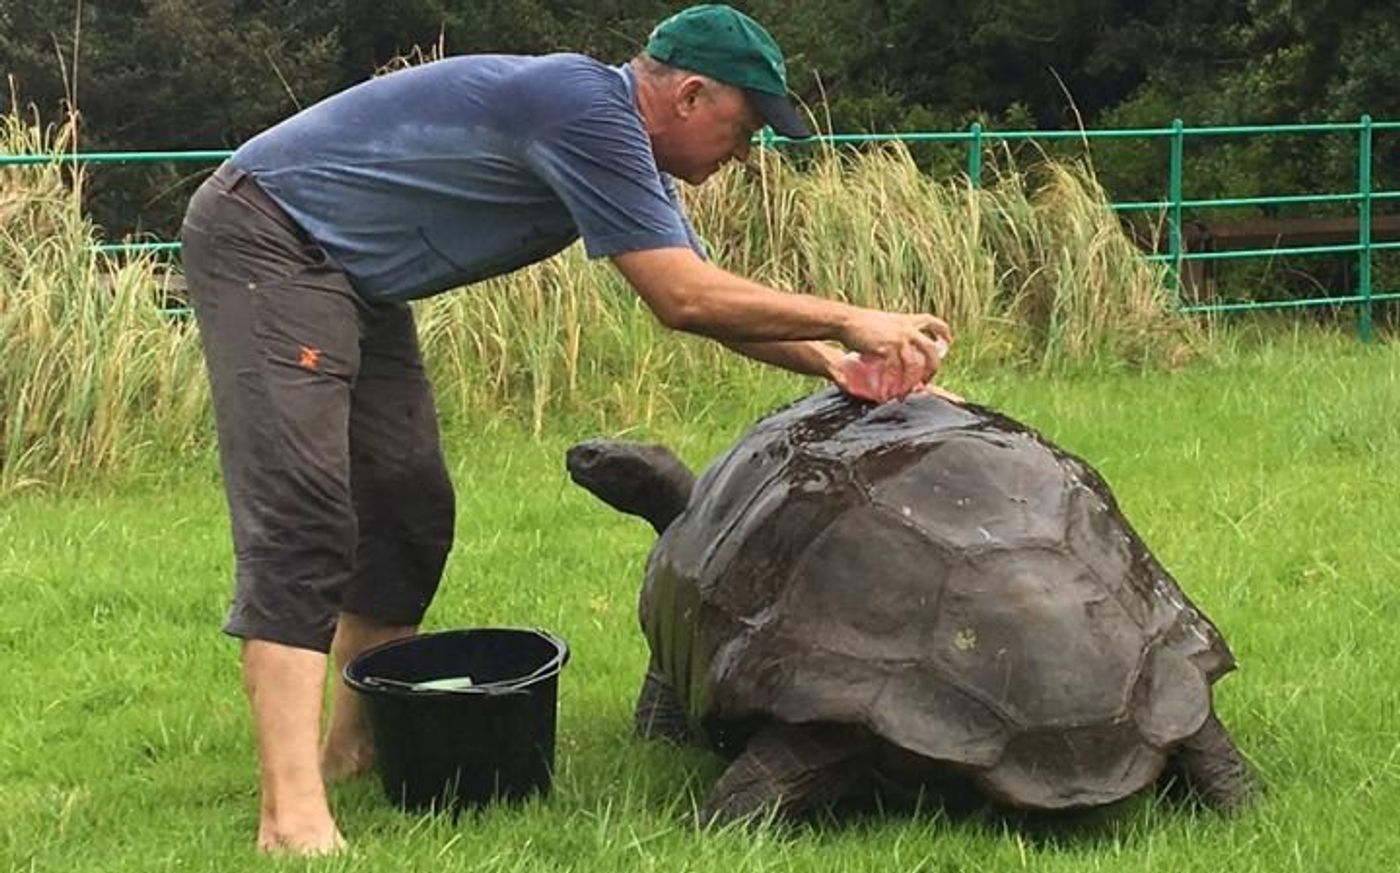 Jonathan the 184-year-old tortoise has received his first bath.